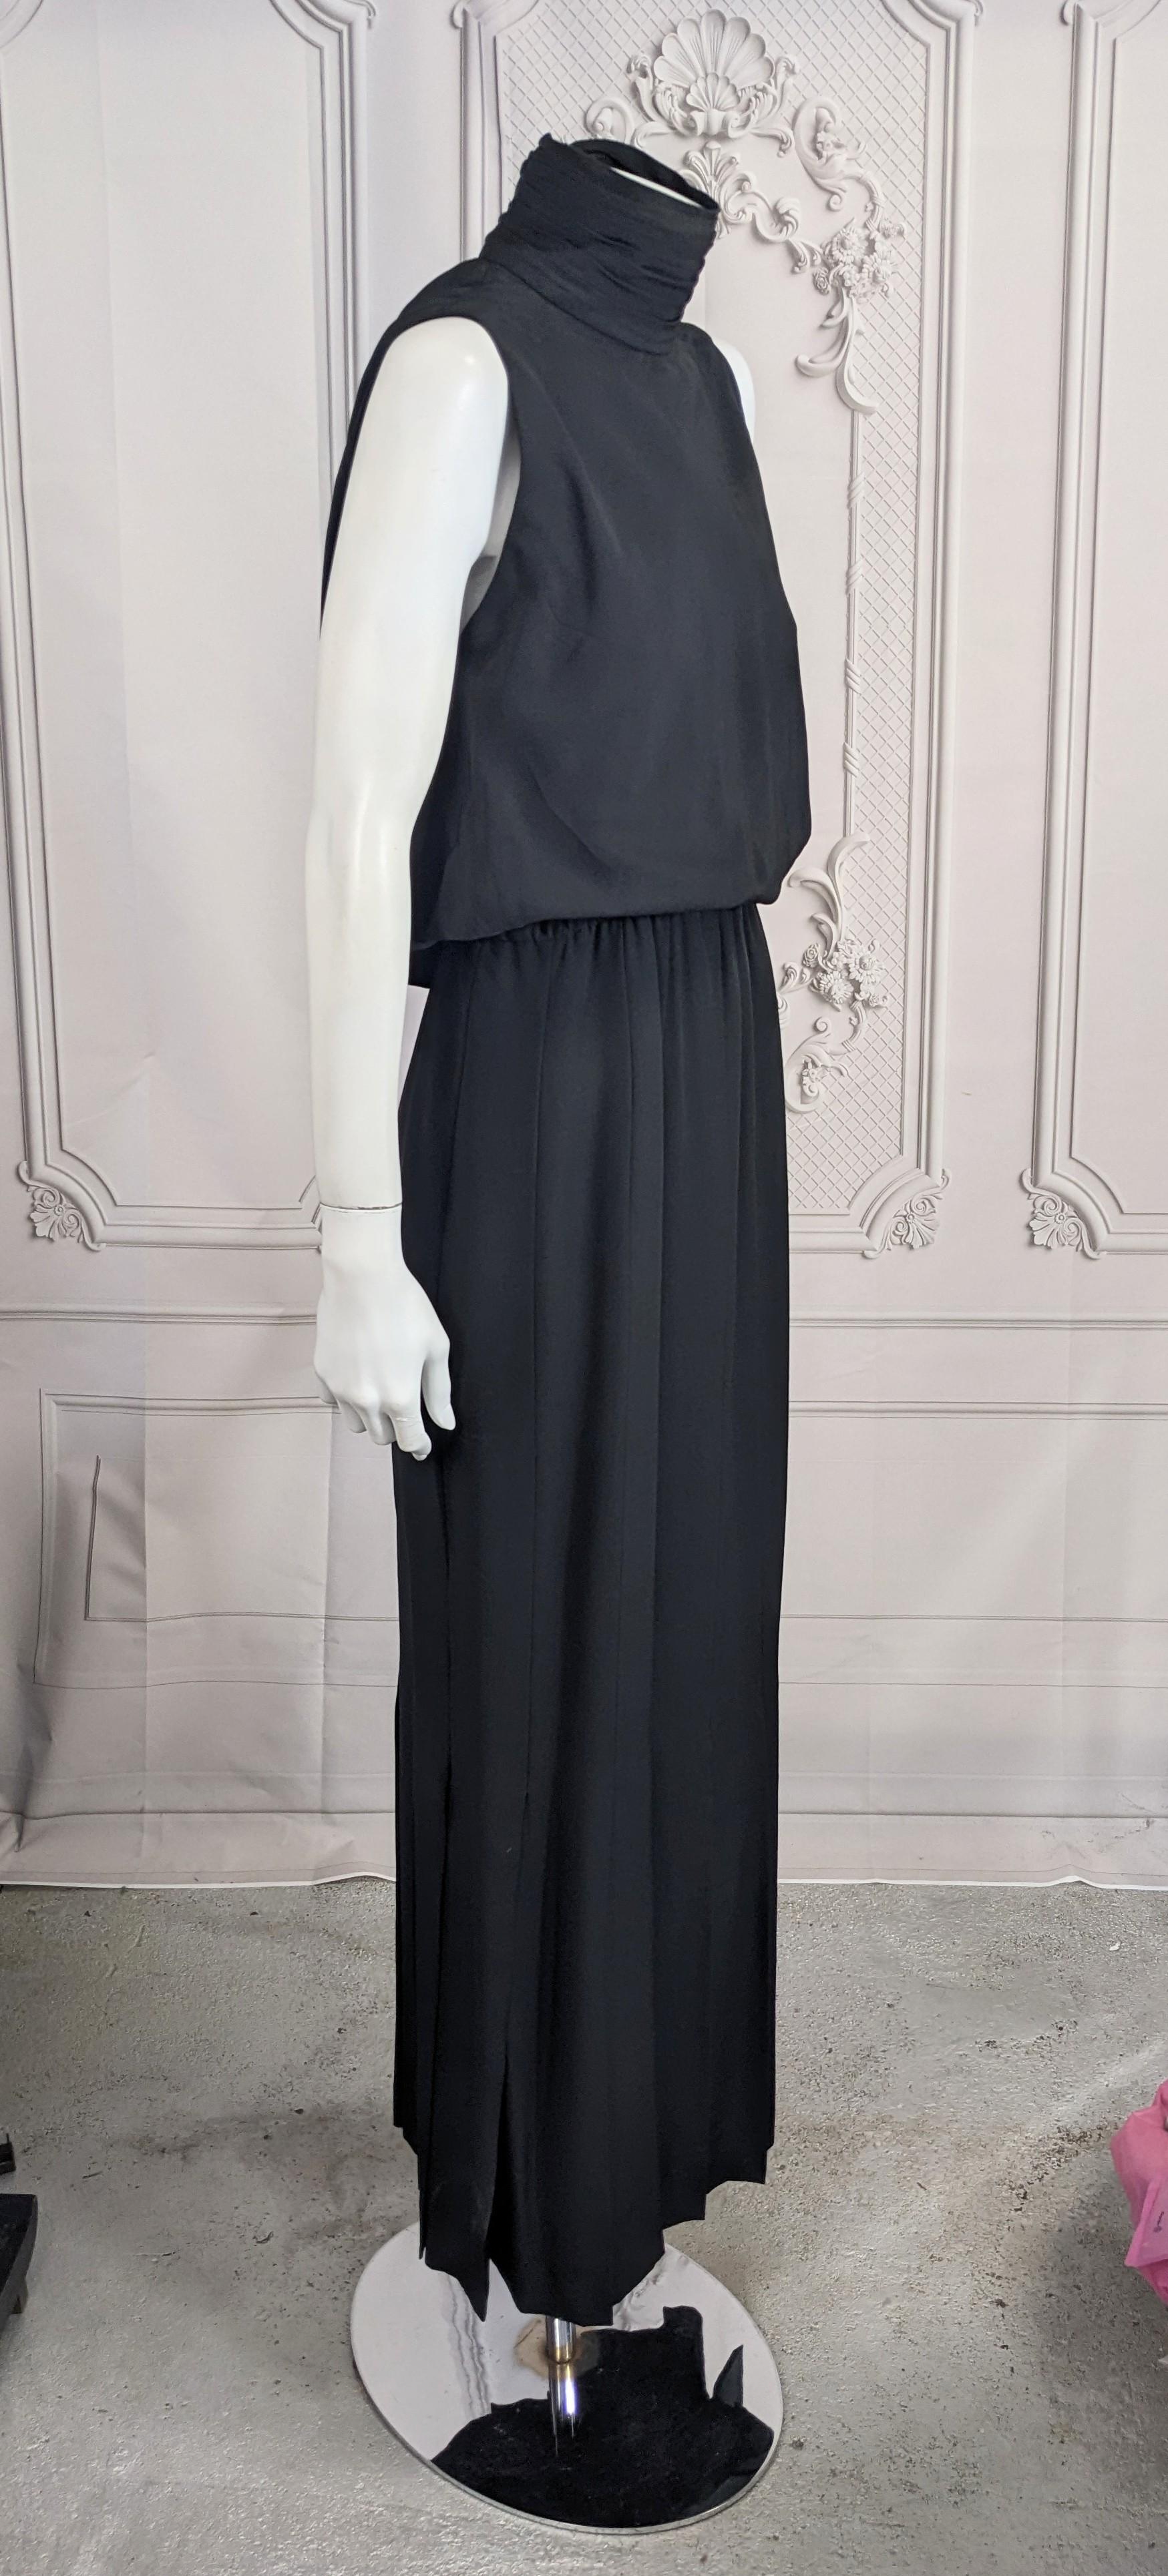 Women's Chanel High Neck Column Gown For Sale